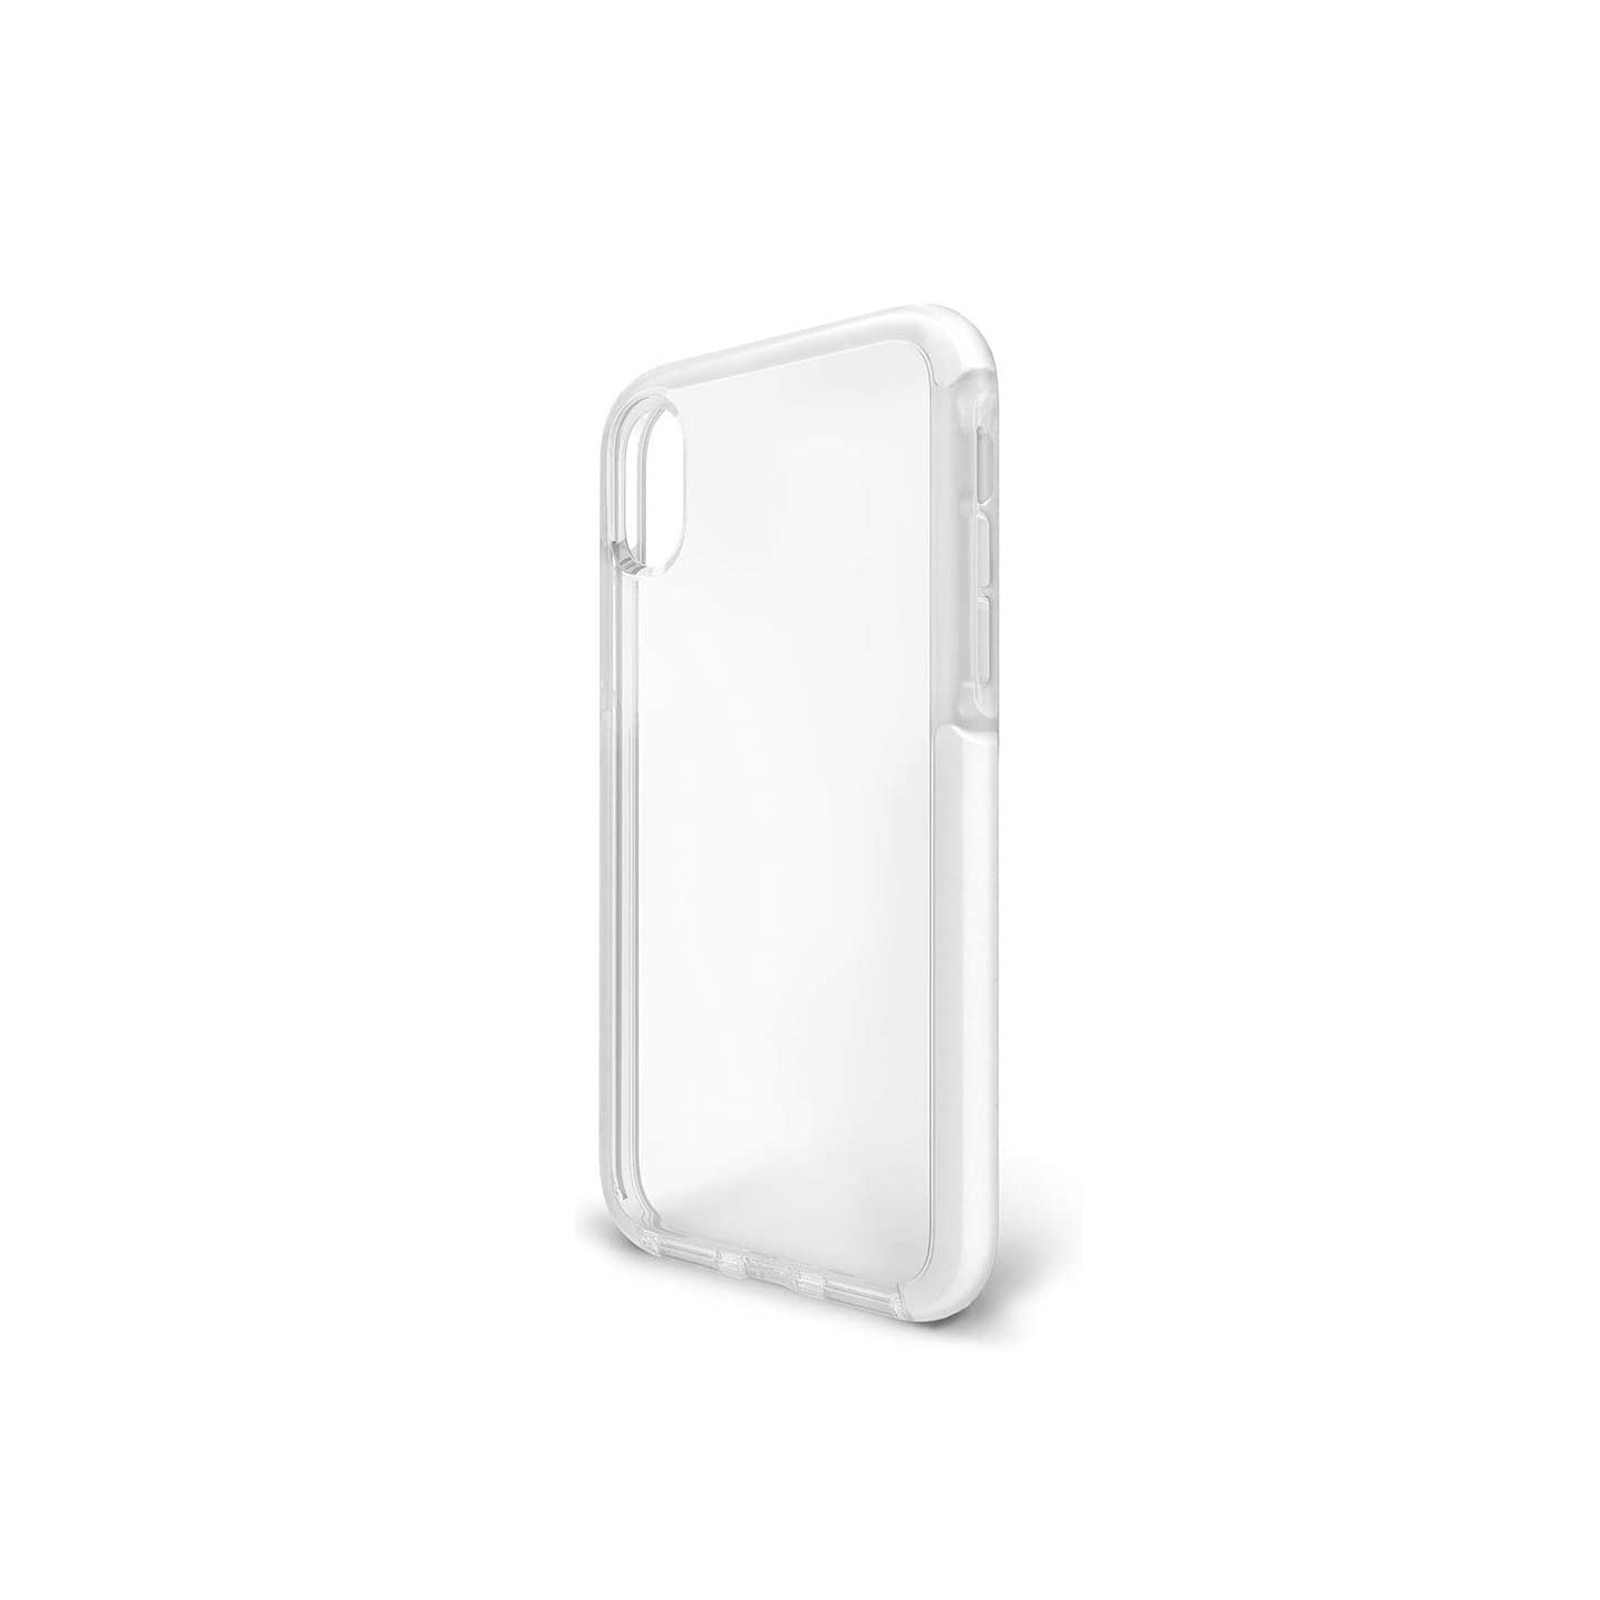 NLA AcePro iPhone X / XS Case [Clear / Clear]